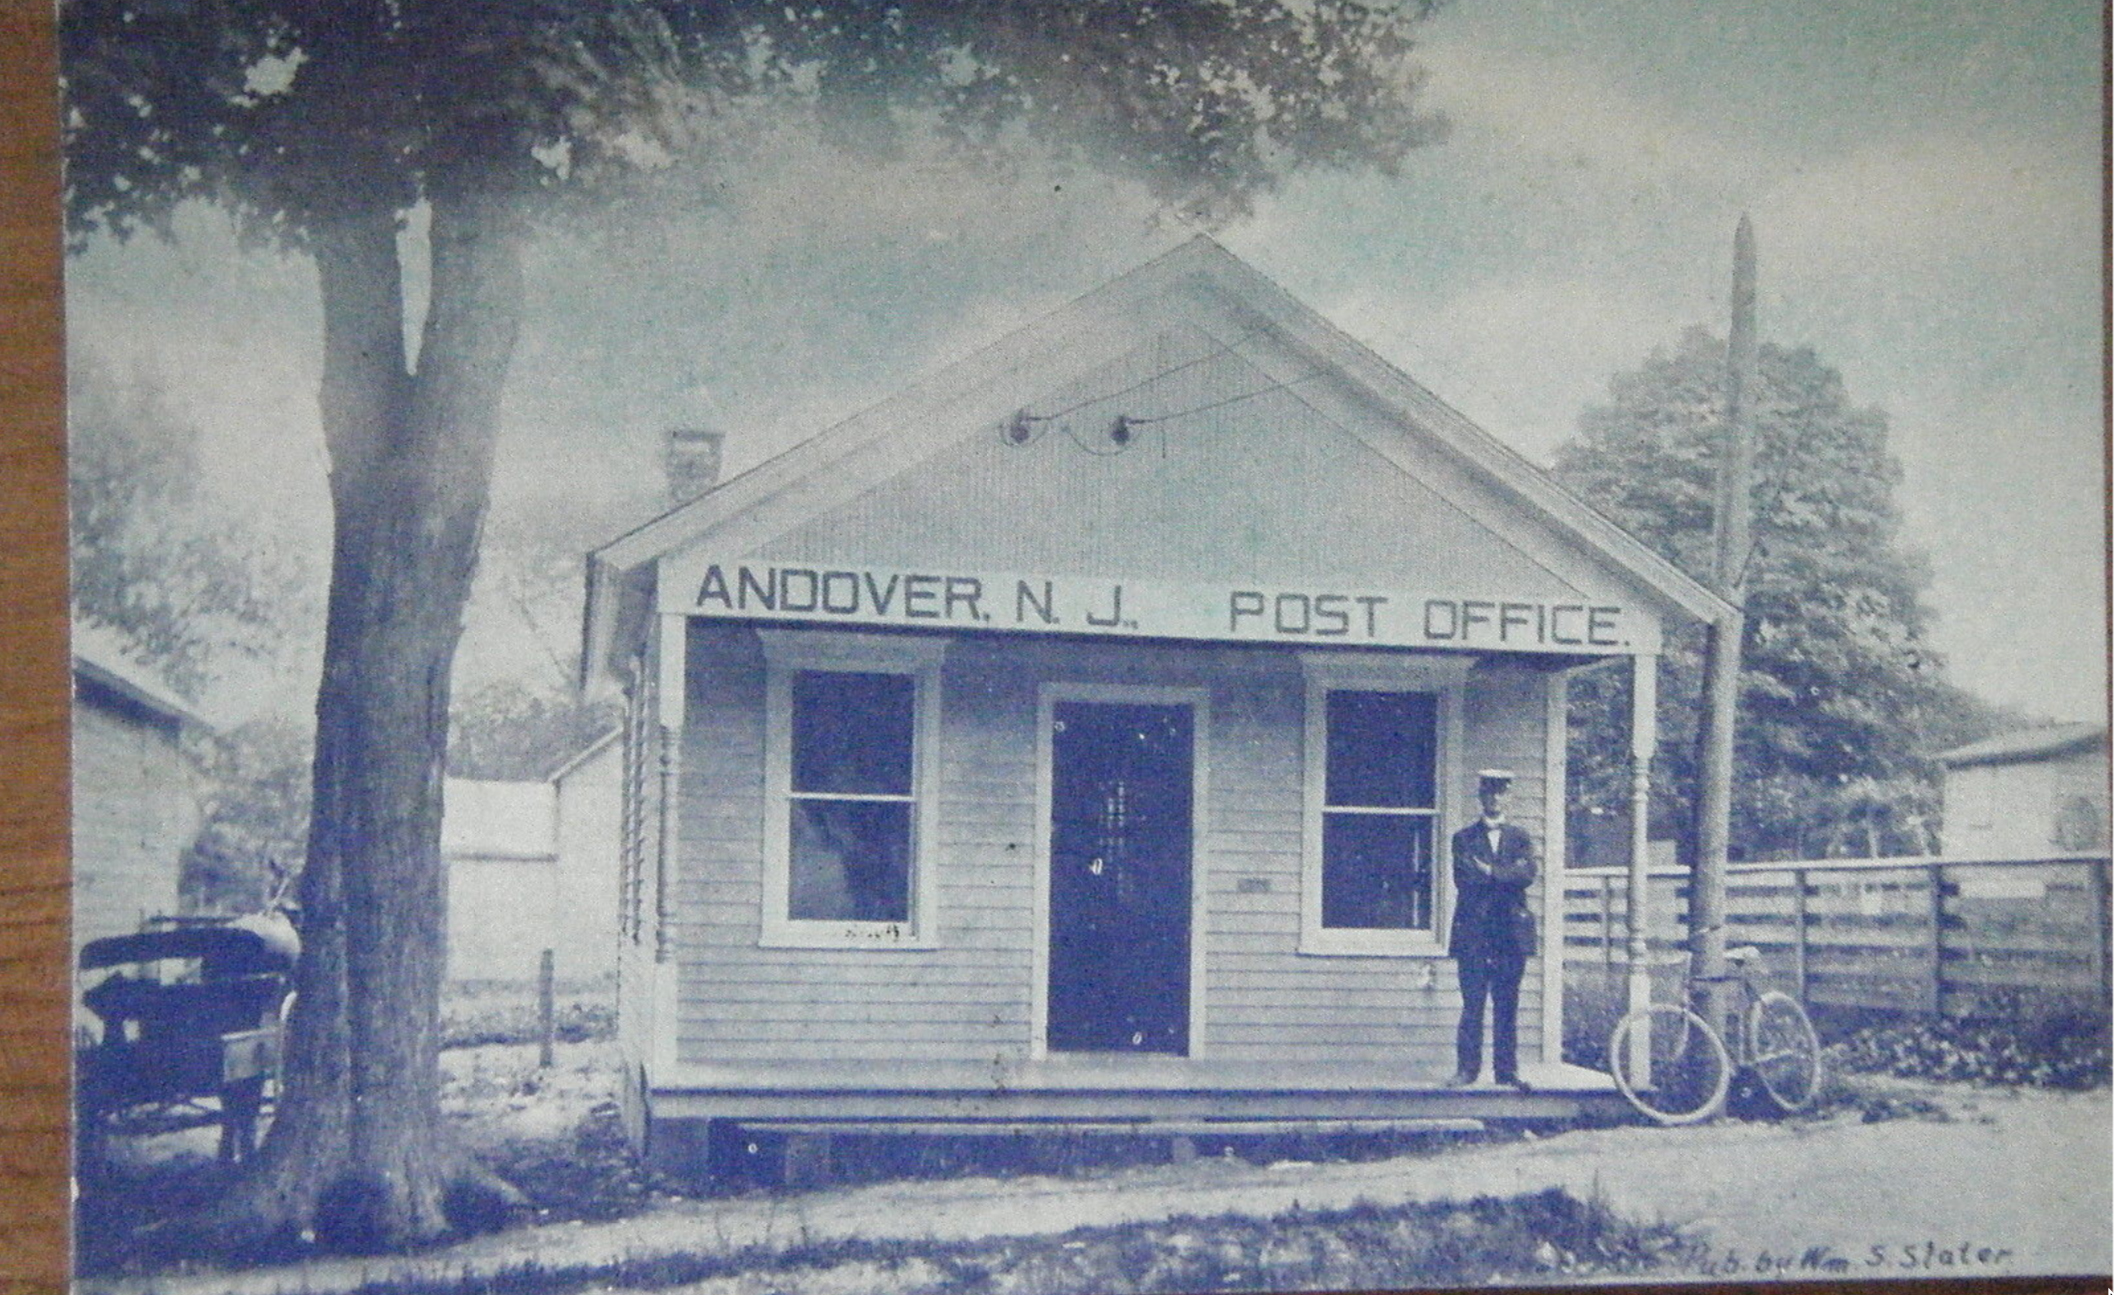 Andover - Andover Post Office - c 1910